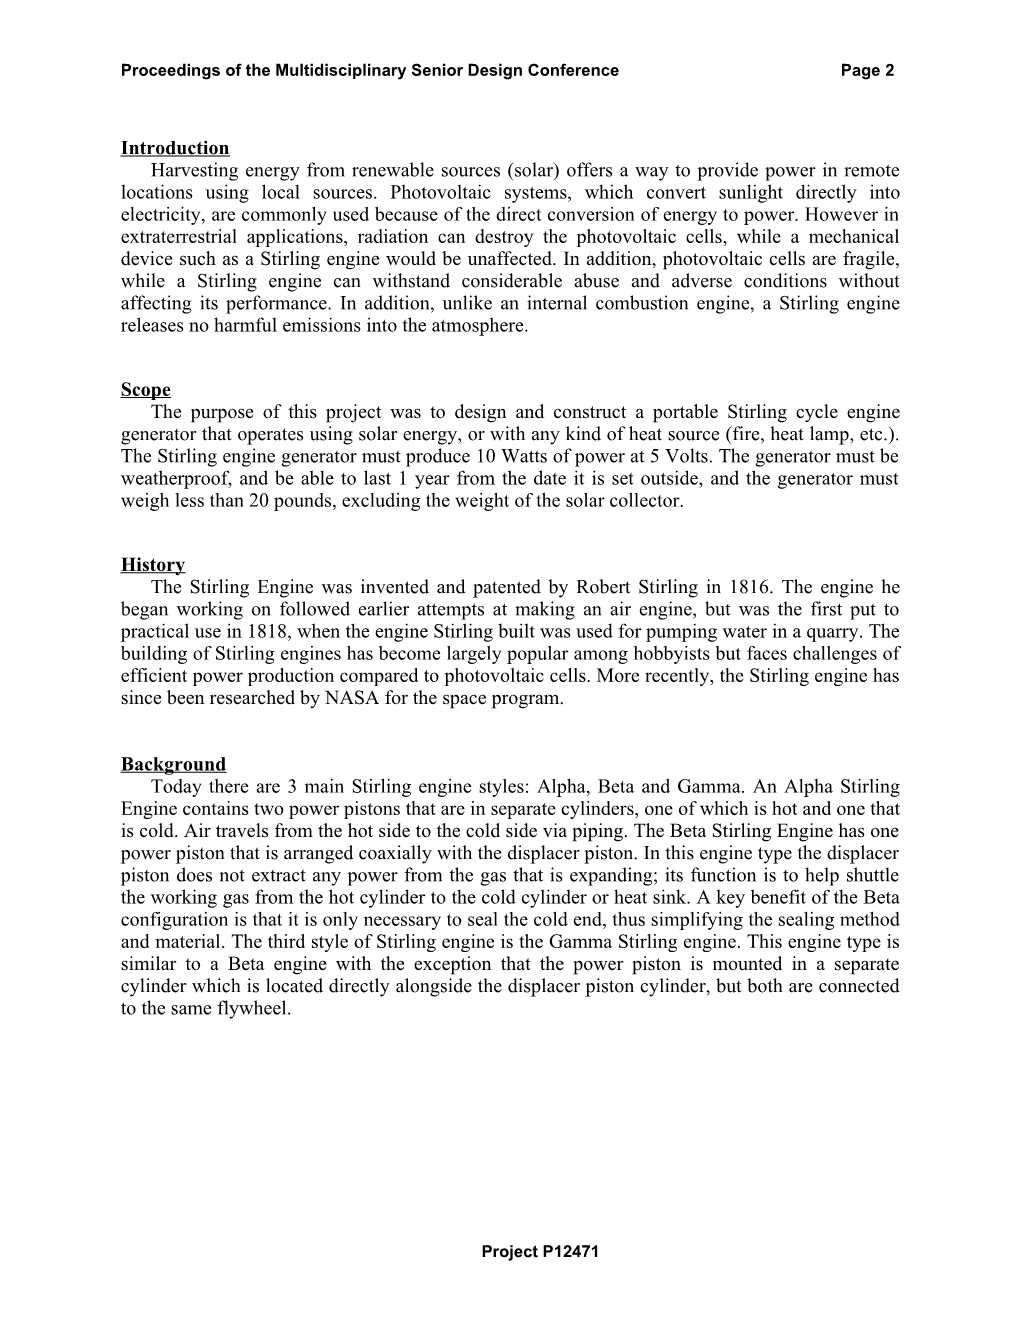 Proceedings of the Multi-Disciplinary Senior Design Conference Page 3 s2